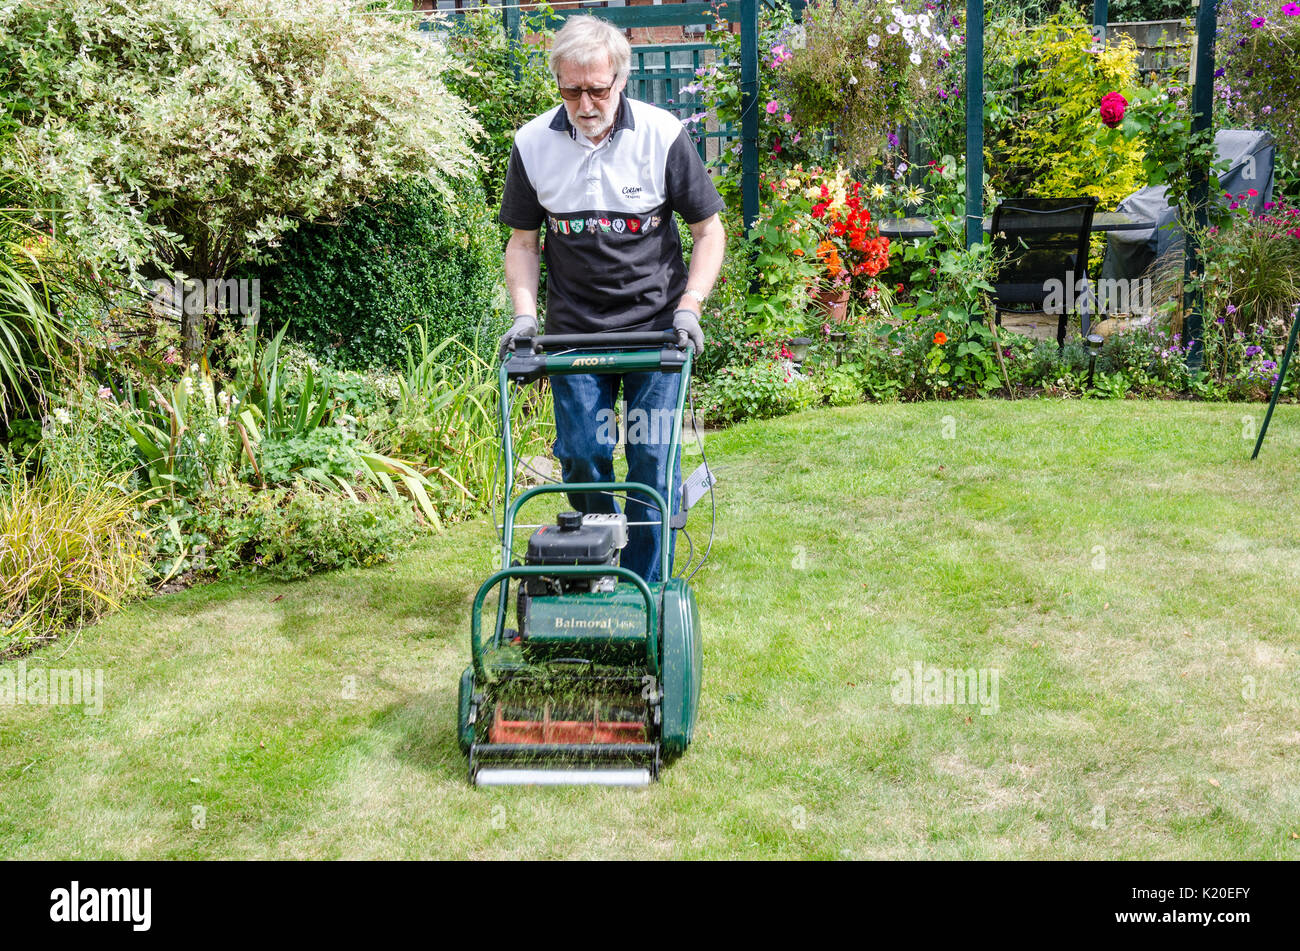 A man cuts his back lawn with a petrol powered lawn mower. Stock Photo